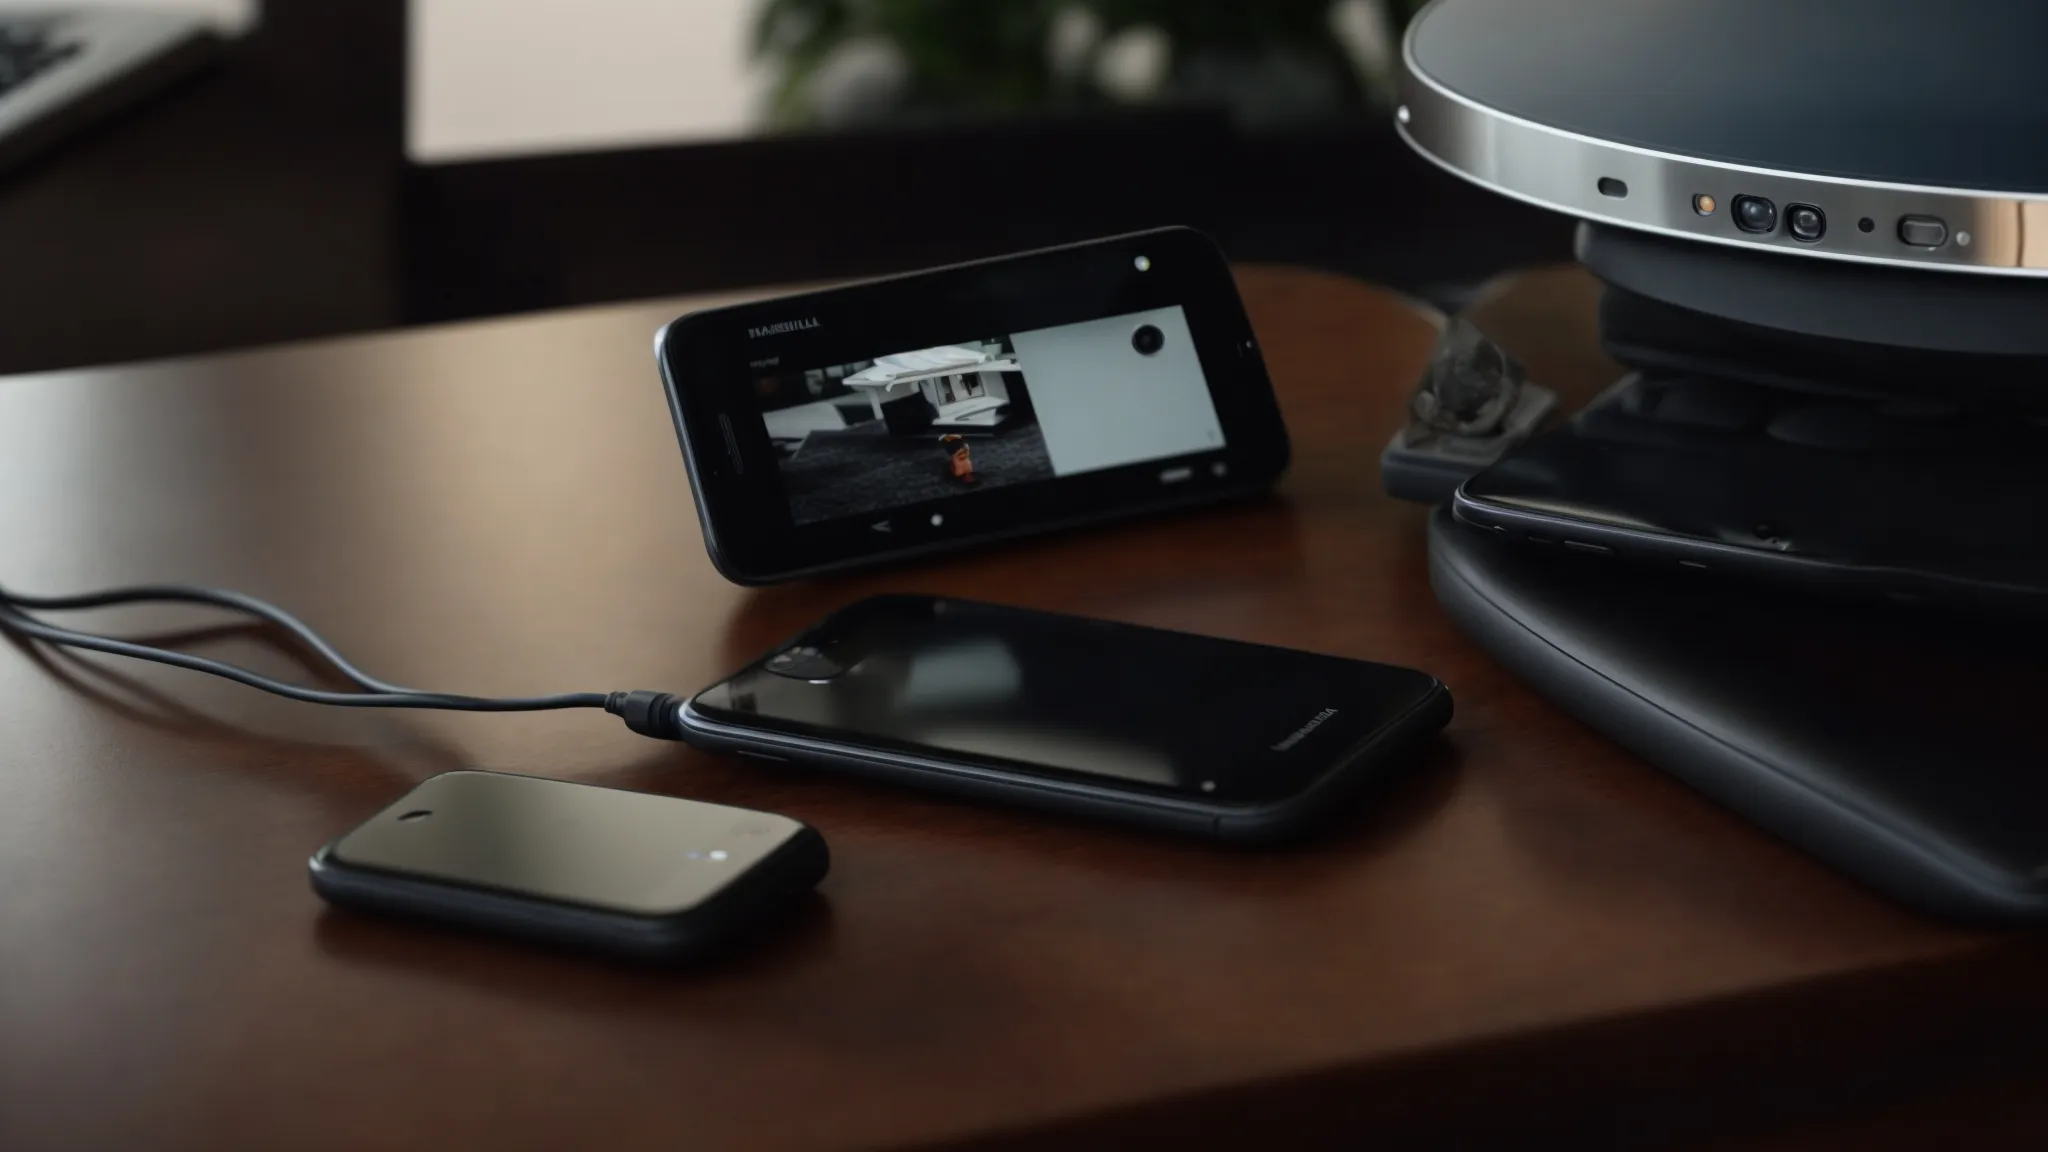 a smartphone placed on a table with a streaming service on the screen, beside a television remote and an hdmi adapter.